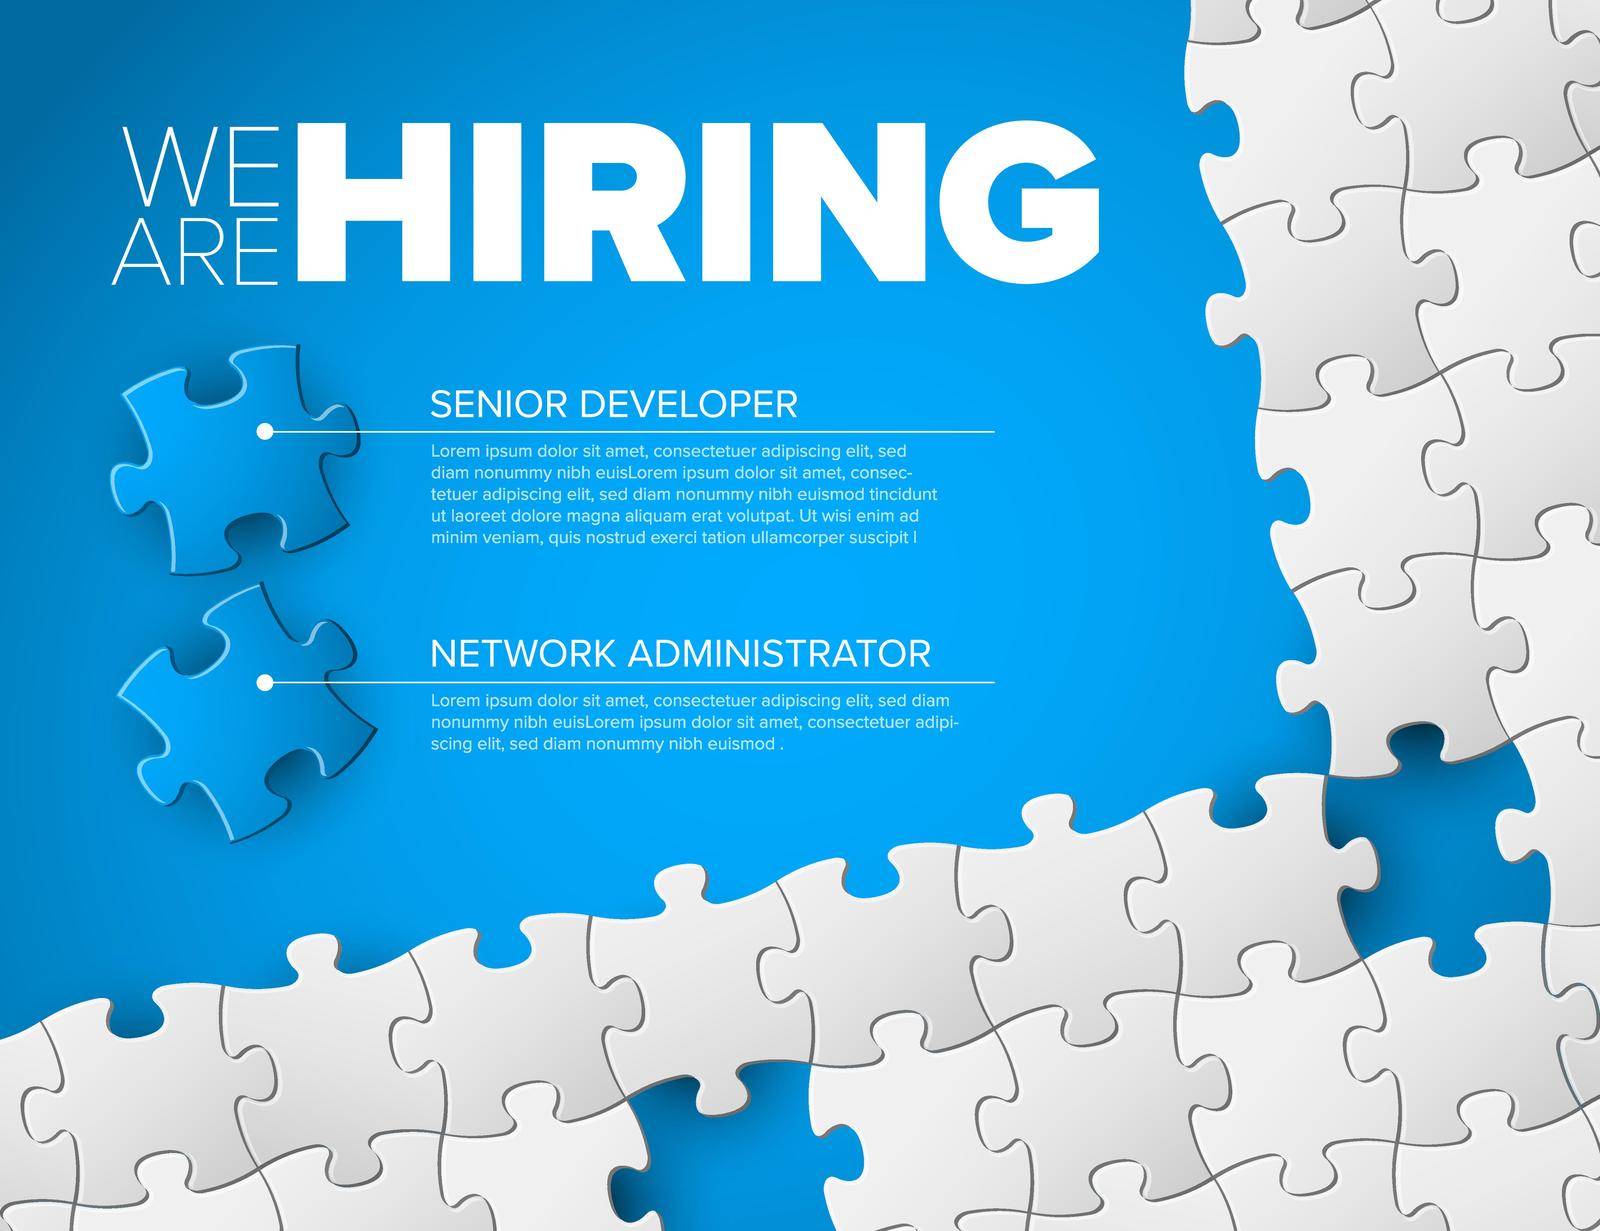 We are hiring minimalistic blue flyer template with puzzle by orson